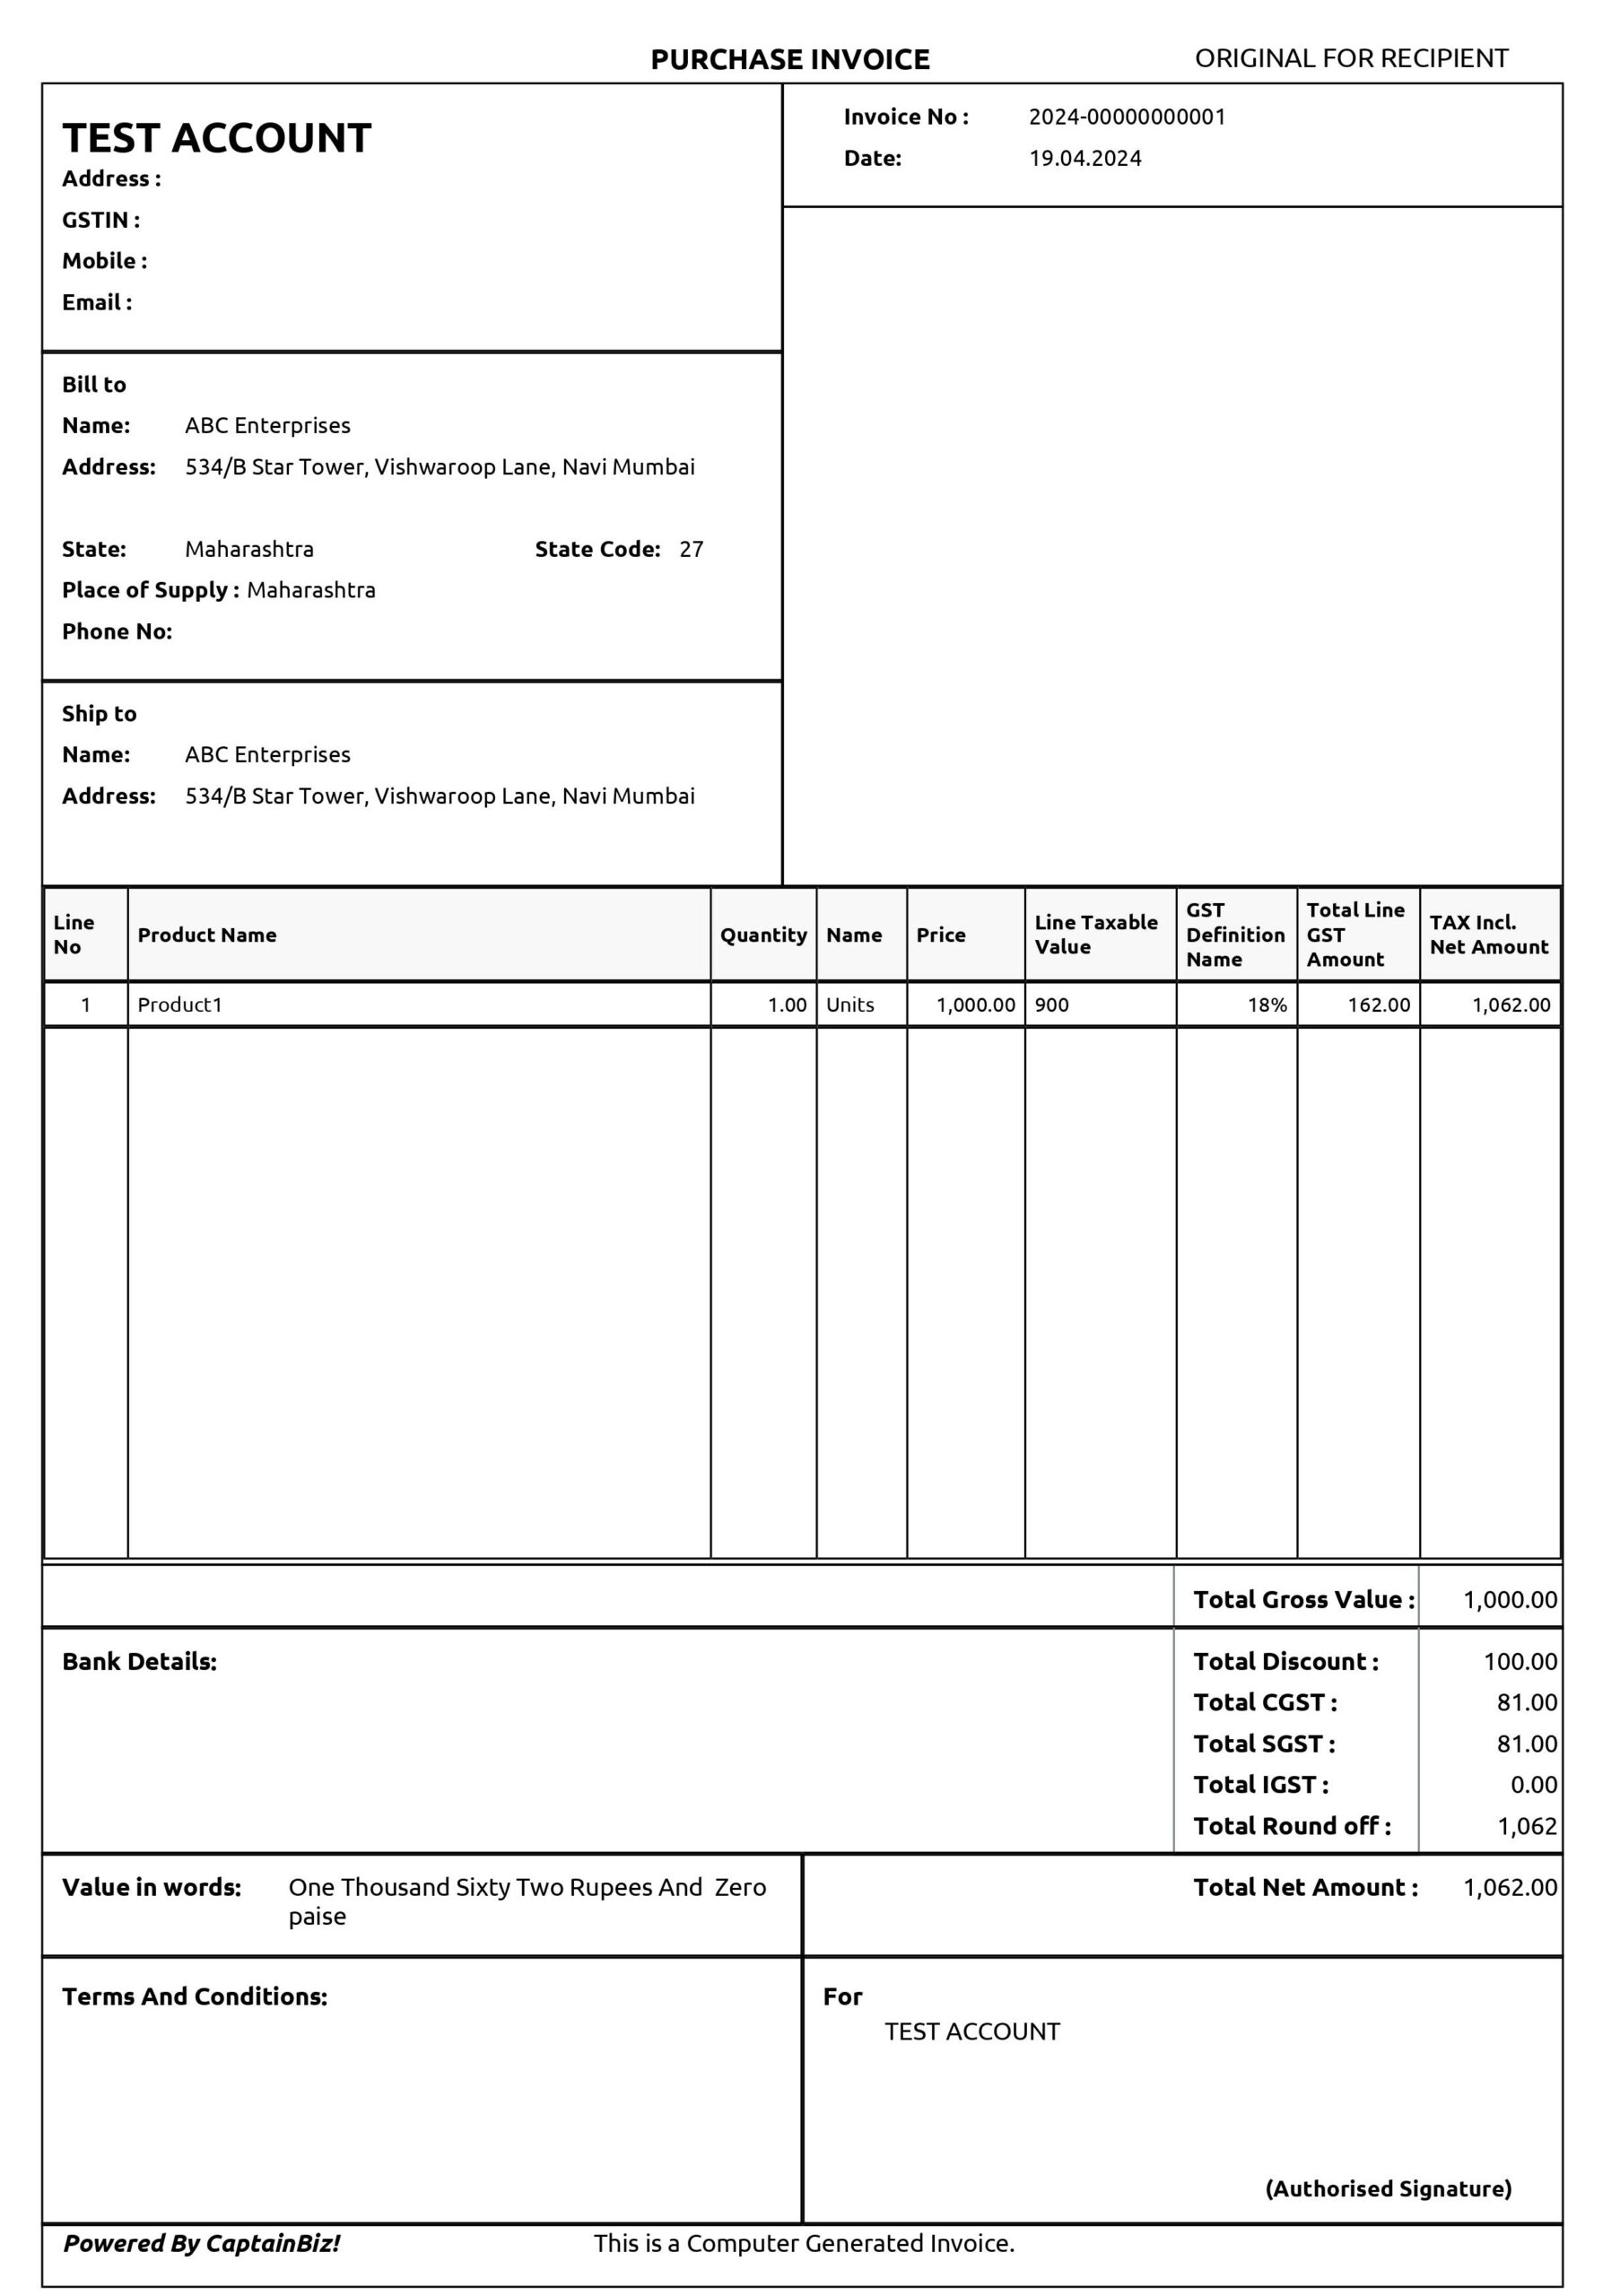 Purchase Invoice Format